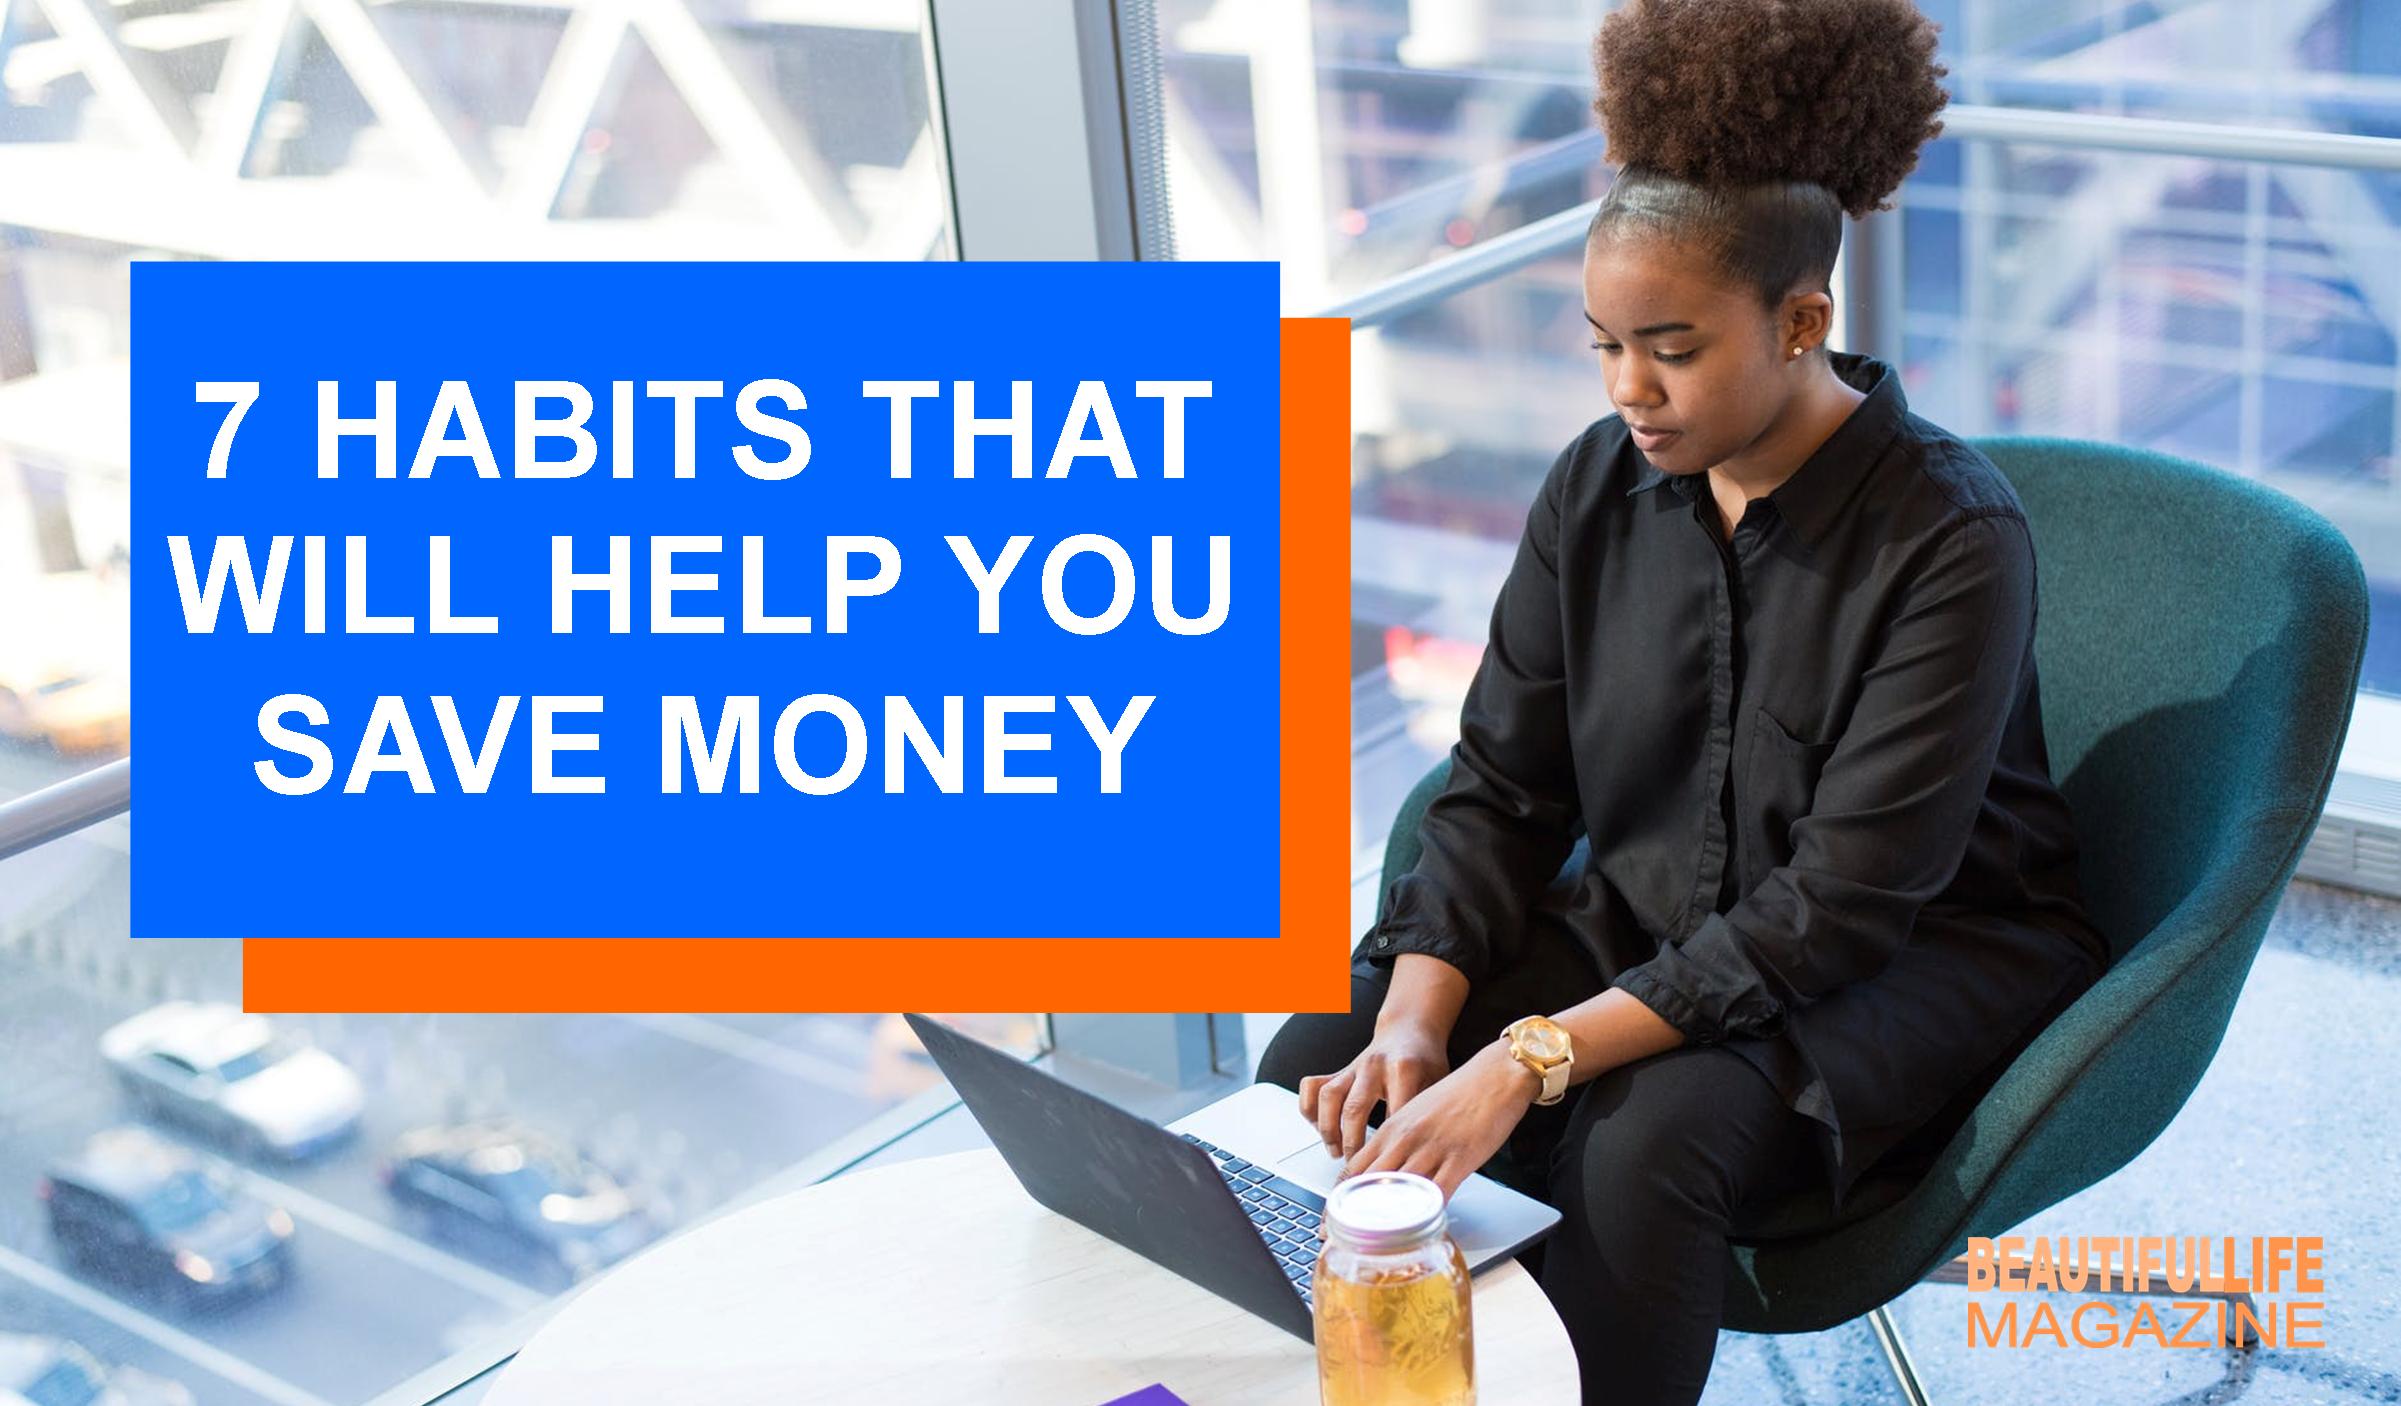 Saving money doesn’t come naturally to some people. I am one of those people. But there are 7 habits that will help you save money — even if you’re a spender. You’ll have less stress and a huge weight will be lifted.